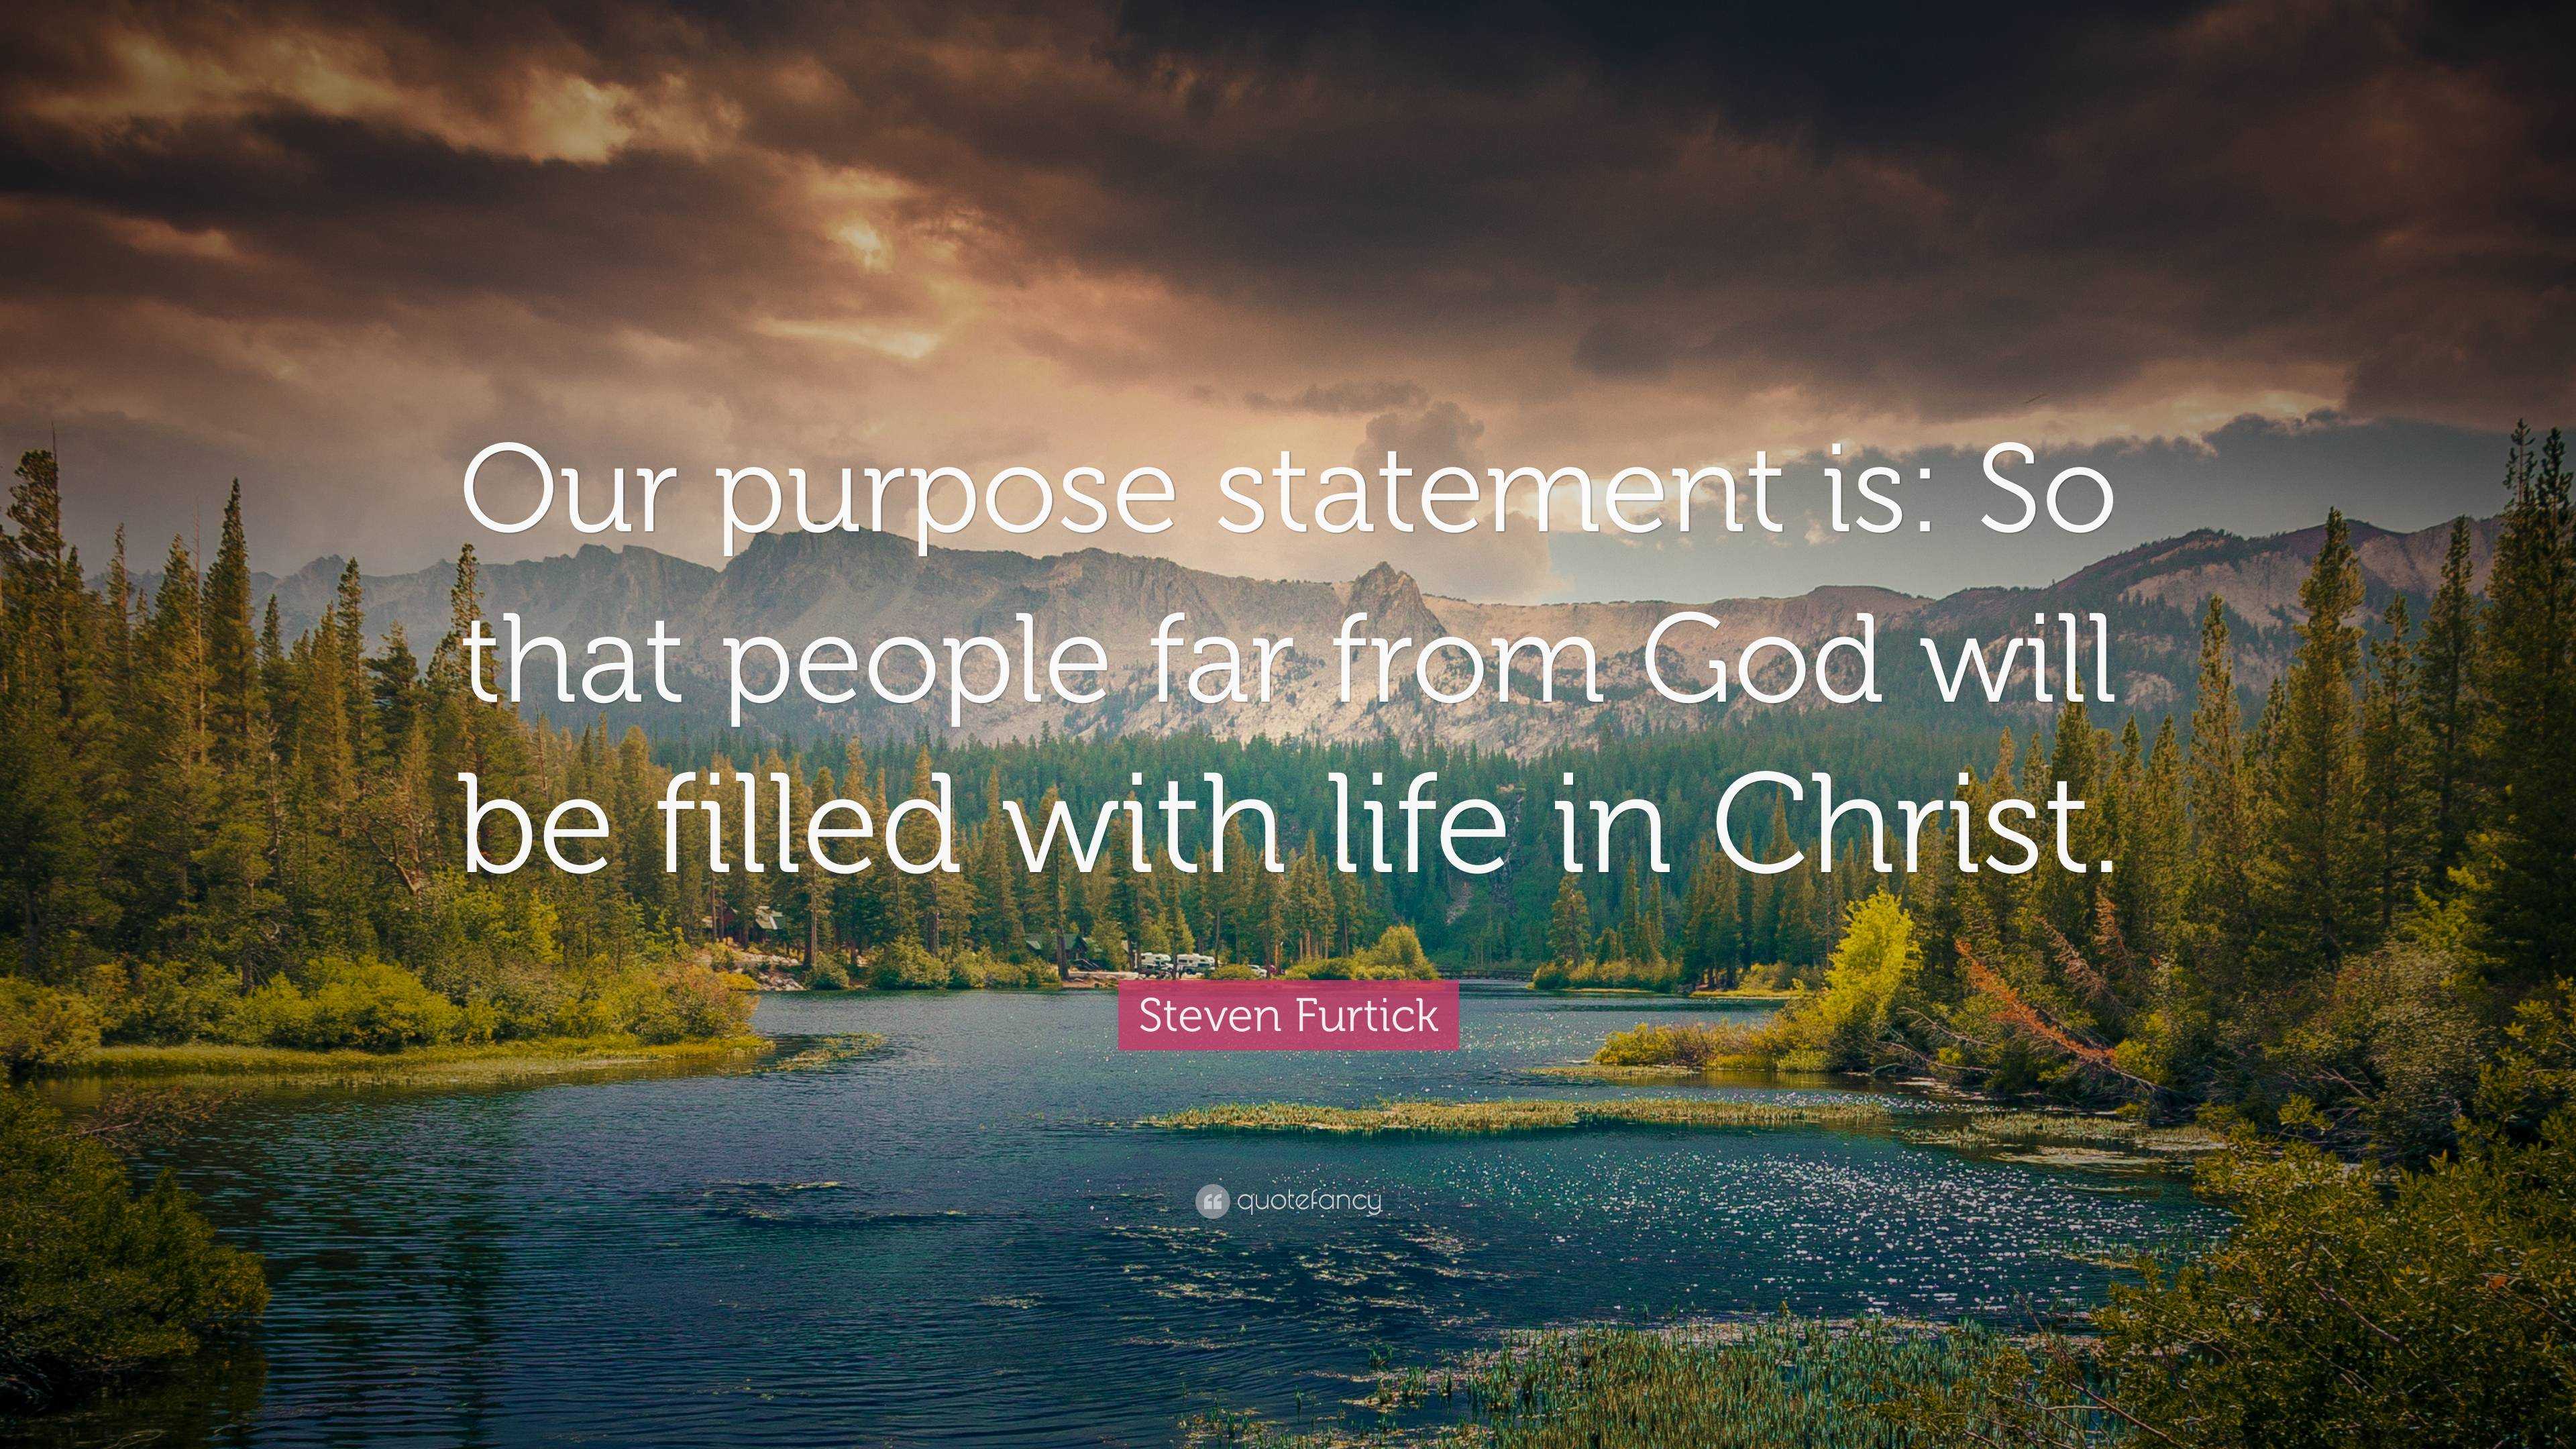 steven furtick quotes on purpose